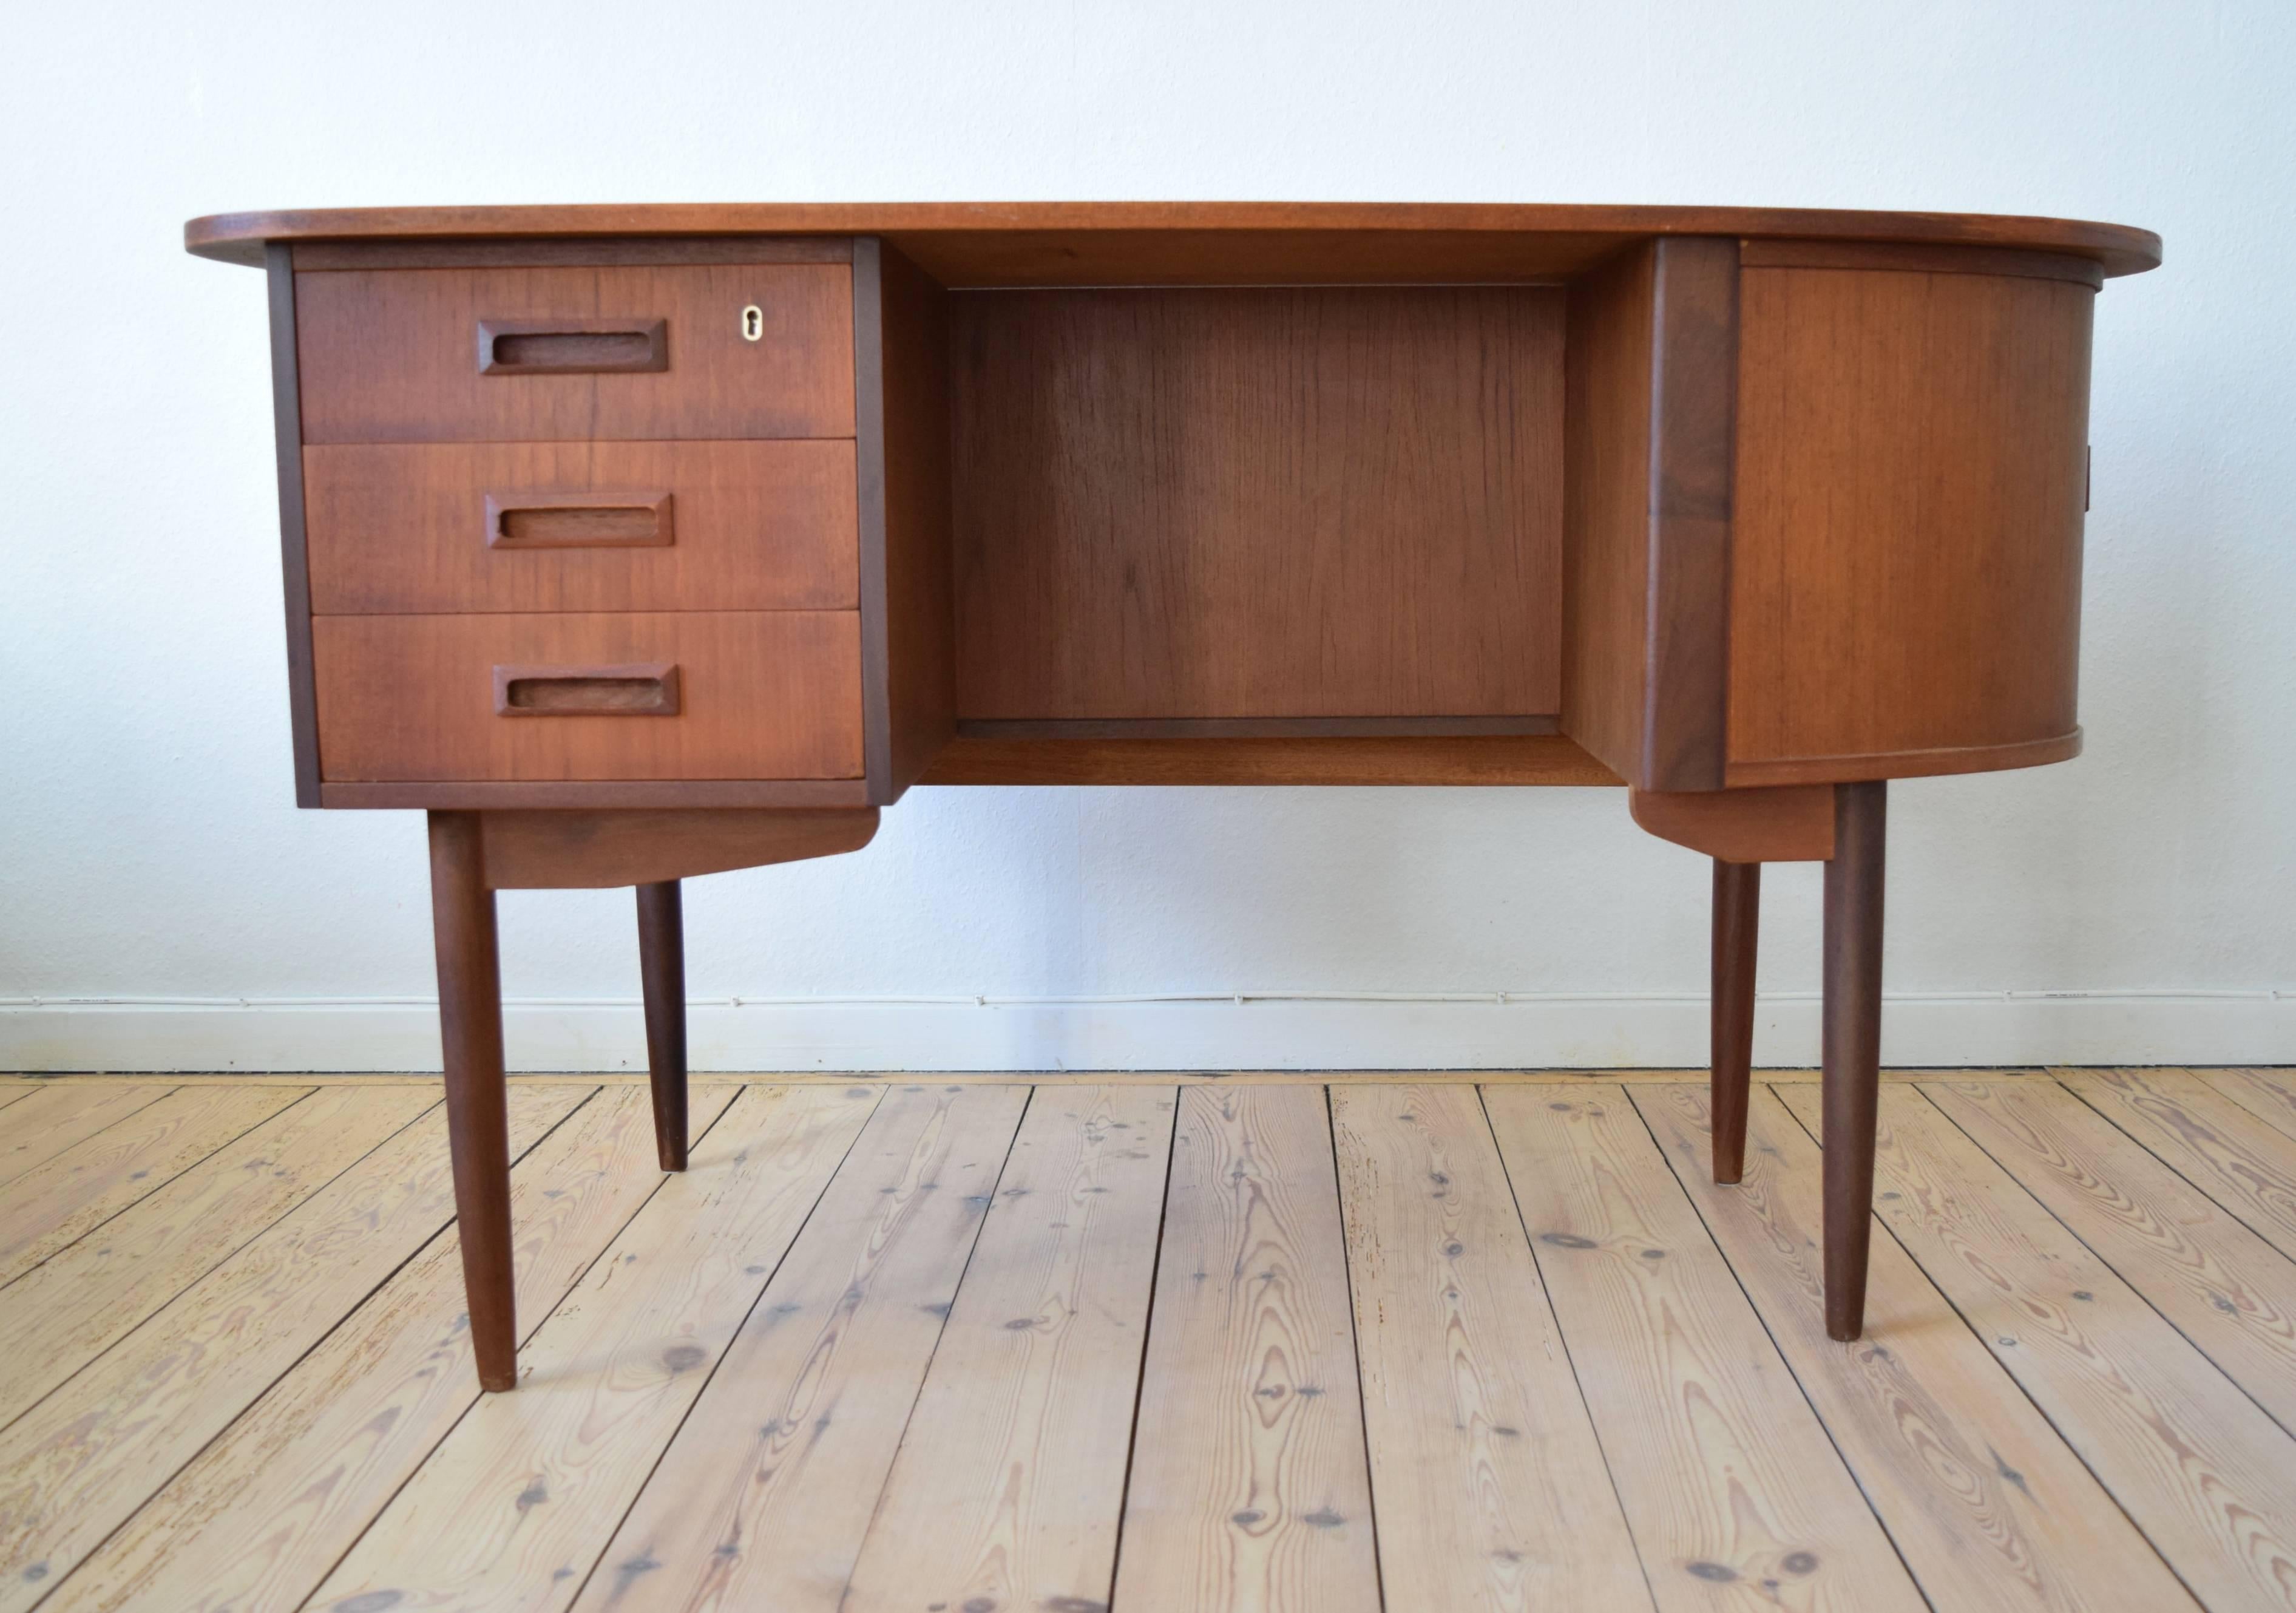 Teak desk manufactured in Denmark in the 1950s featuring an organic kidney shape top plate, bar with tambour door, bookshelf on the back and three drawers one lockable. Apart from a few marks here and there on the top plate this item is in good